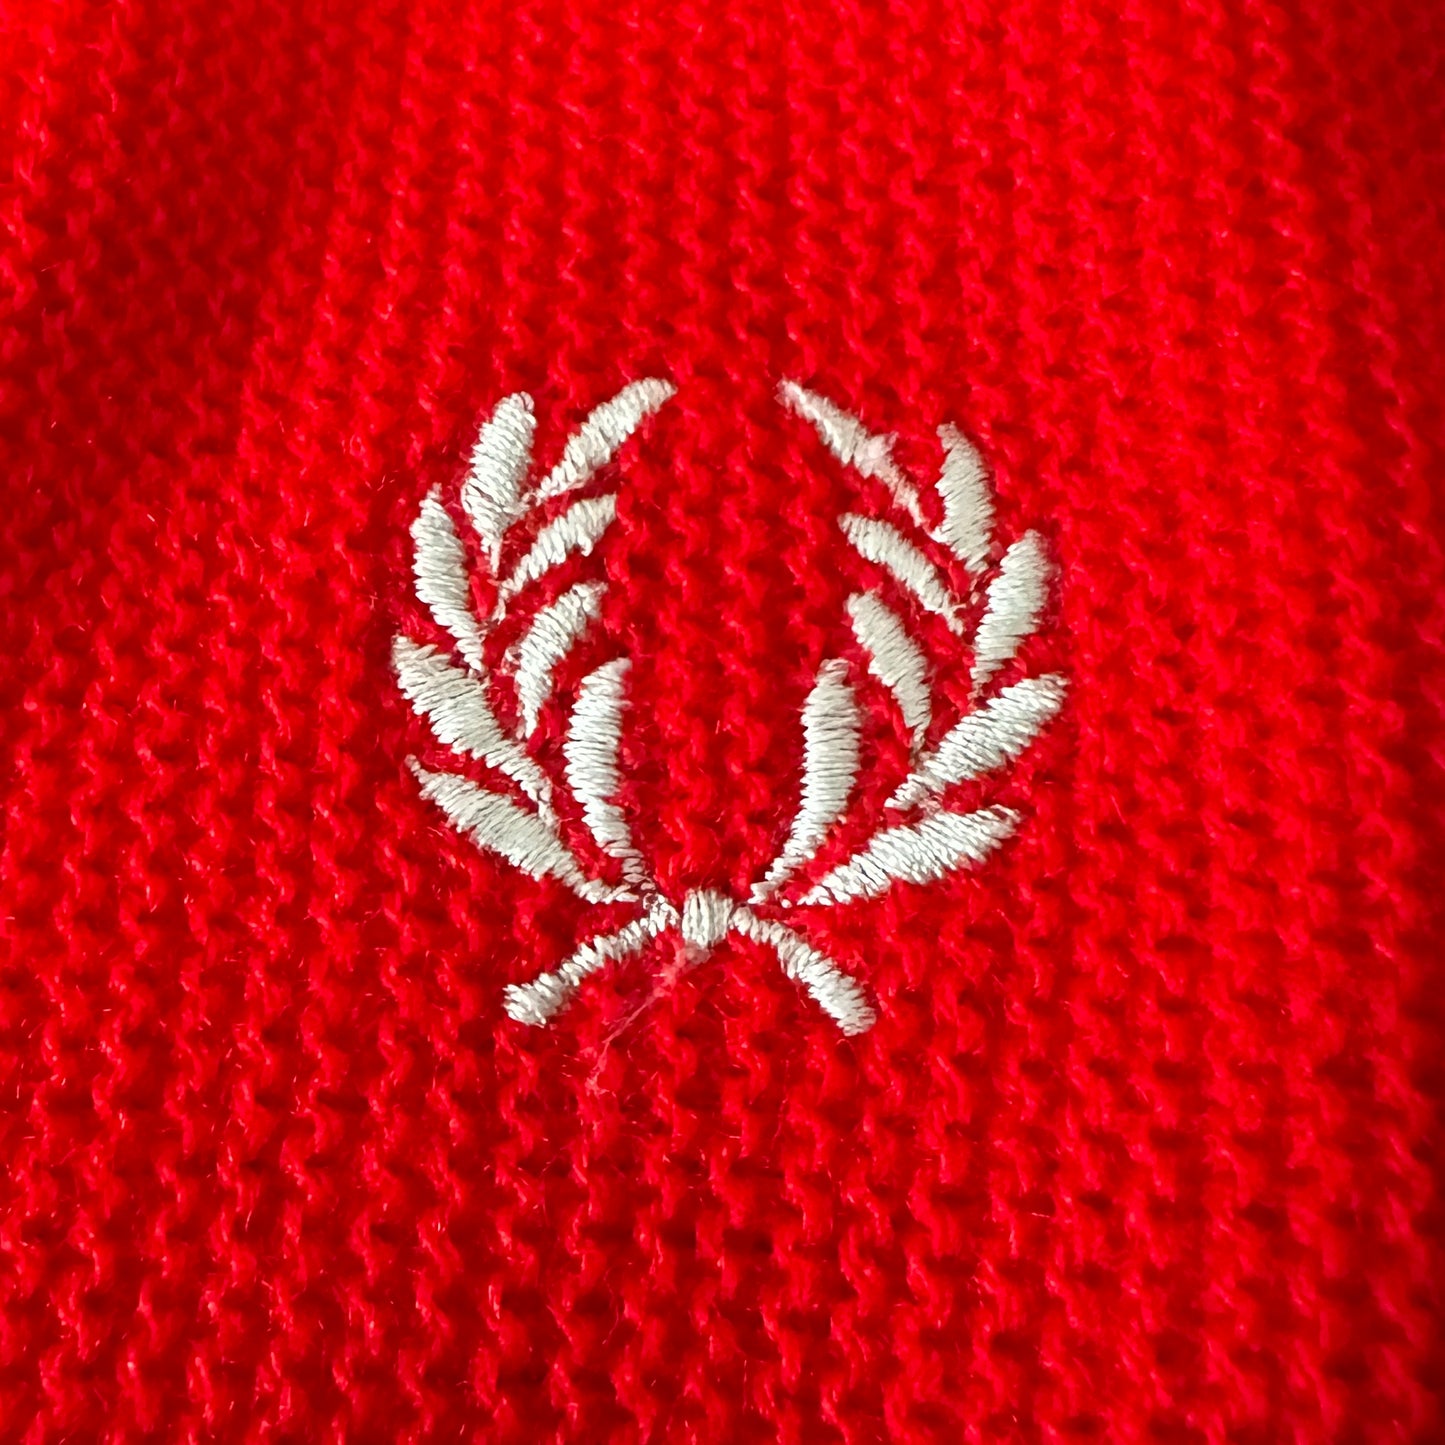 Fred Perry Vintage 80s Red Cardigan - Deadstock - 8 / XXL - Made in Spain